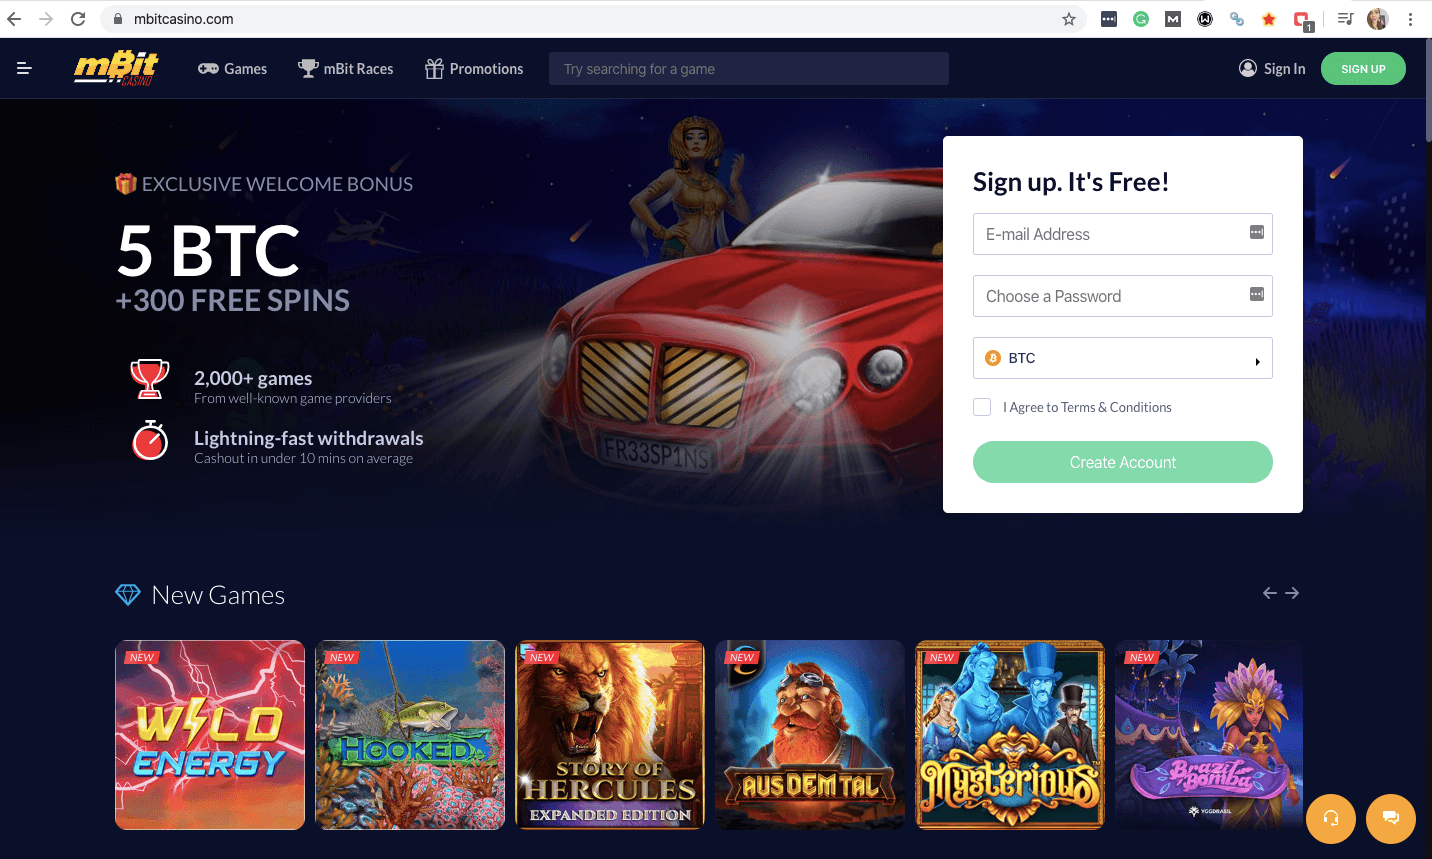 Play casino games with bitcoin